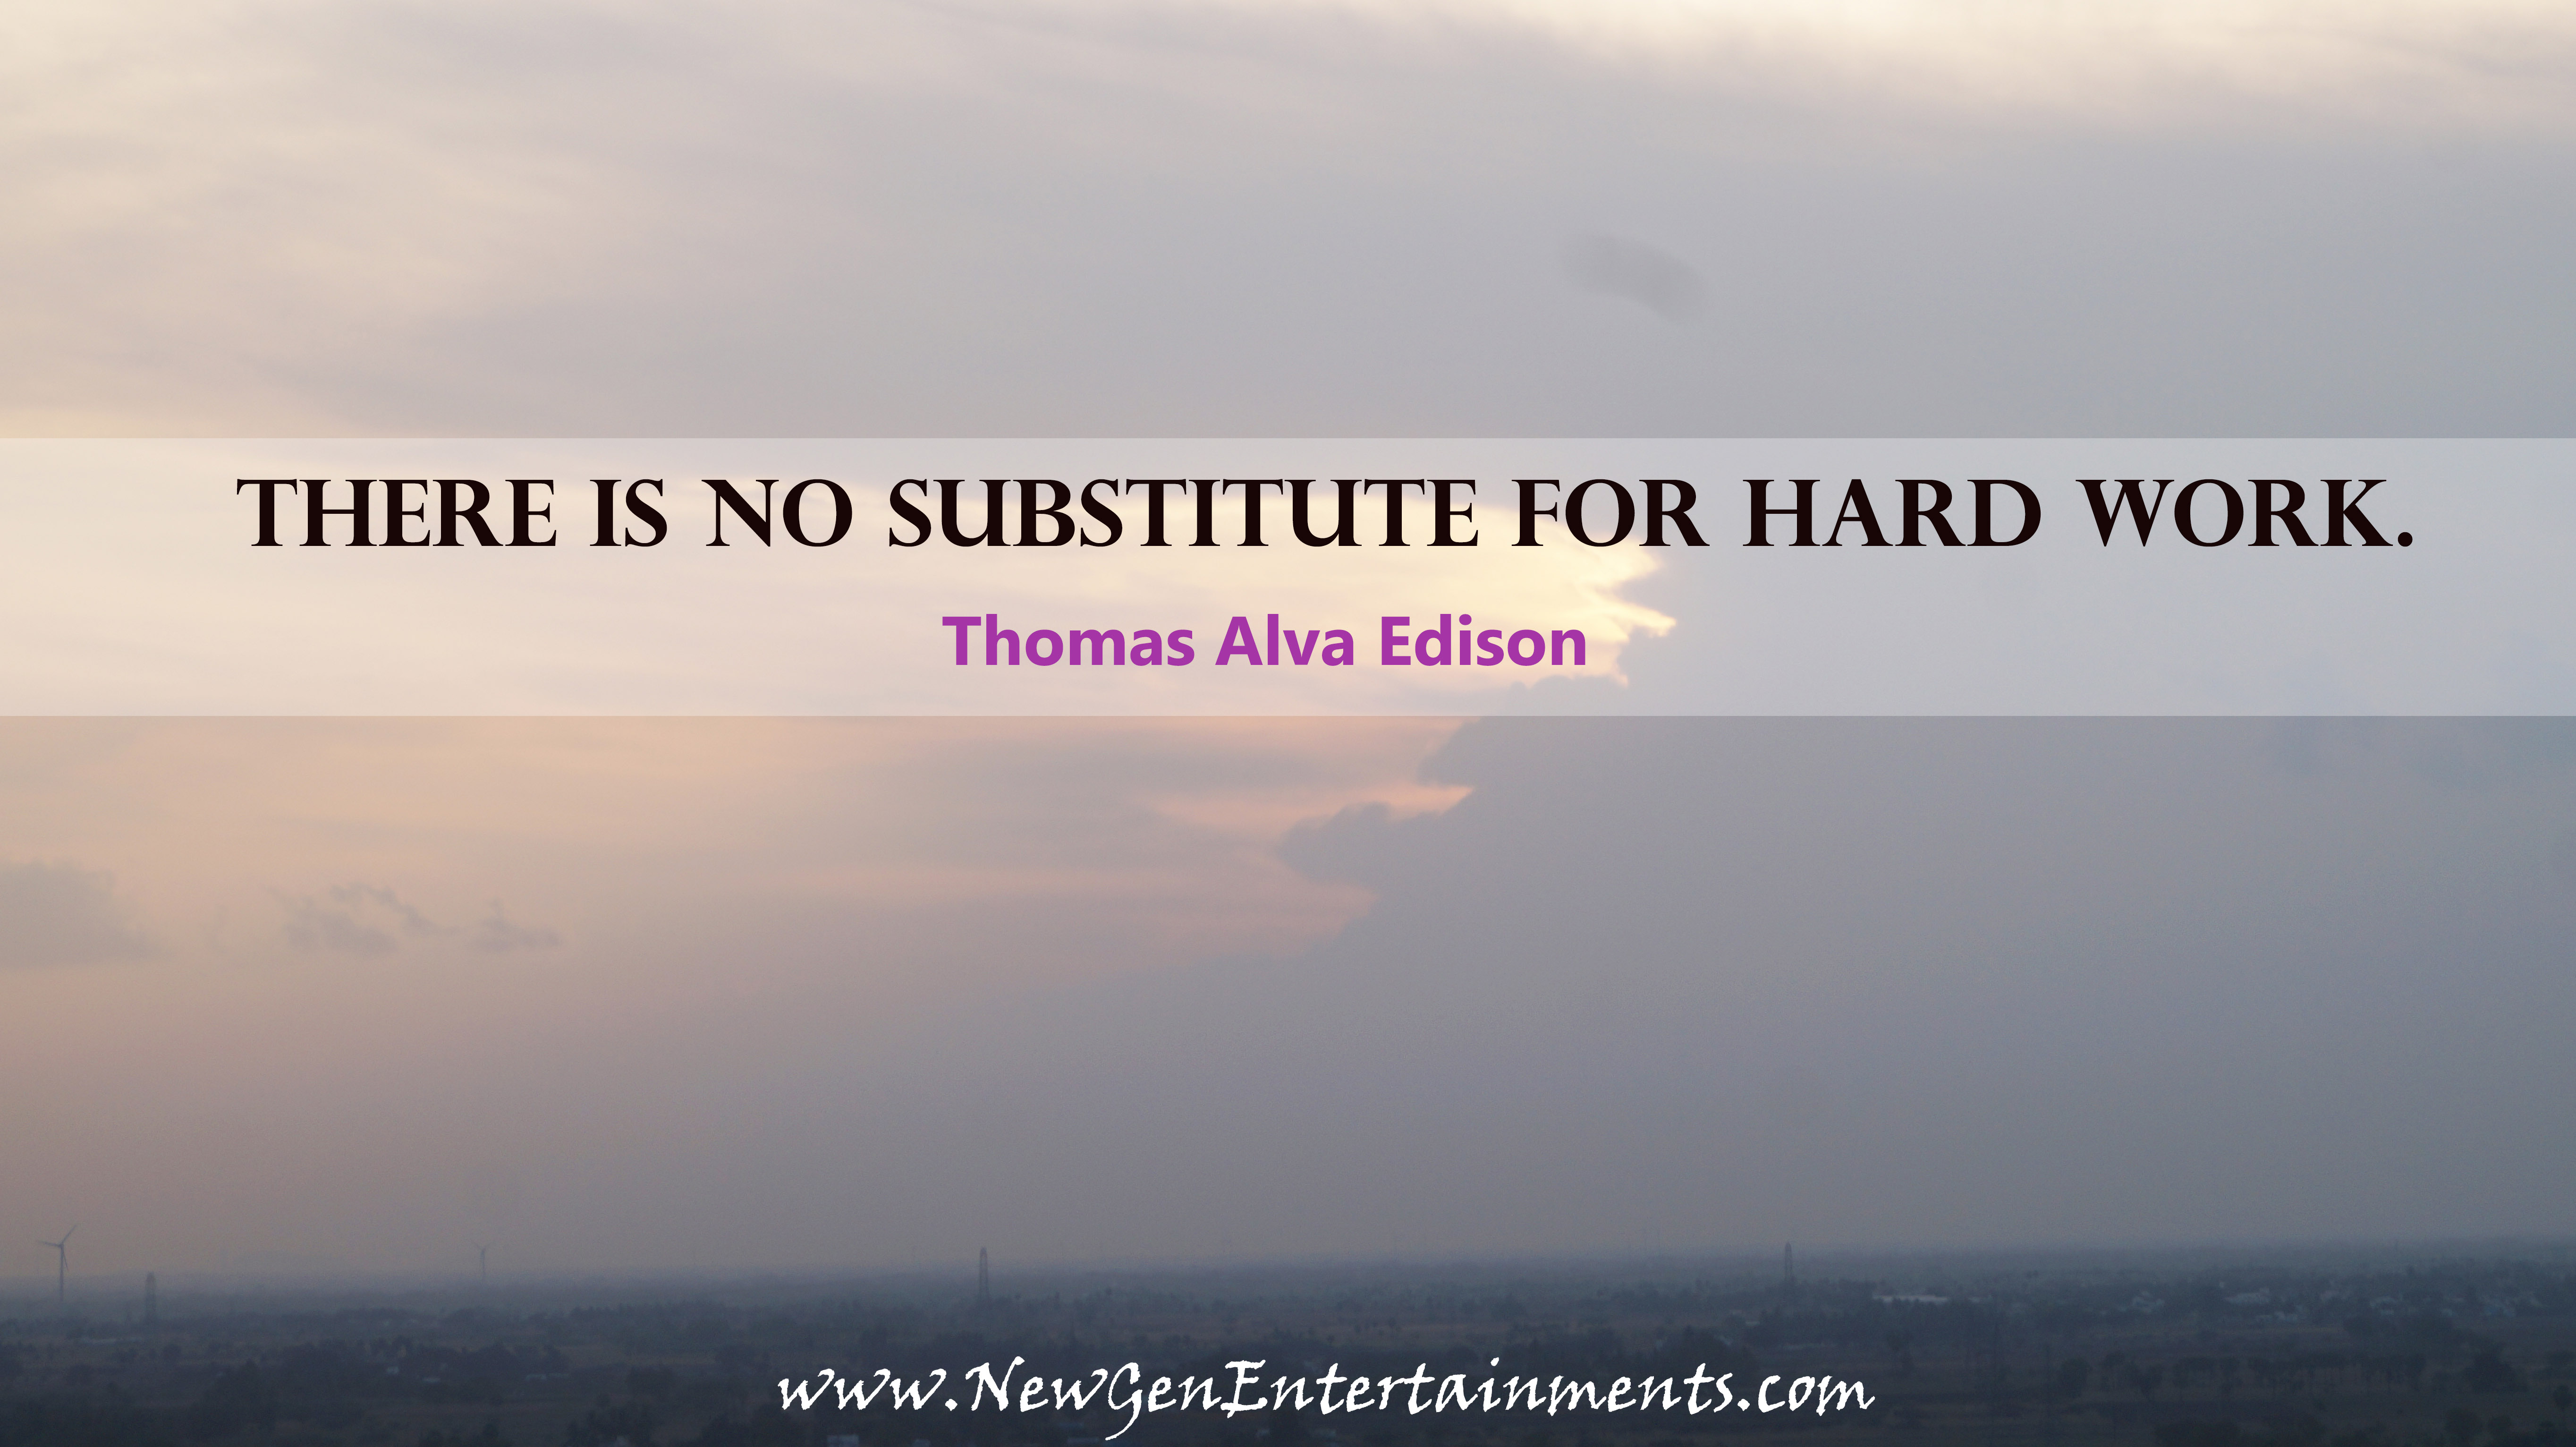 There is no substitute for hard work